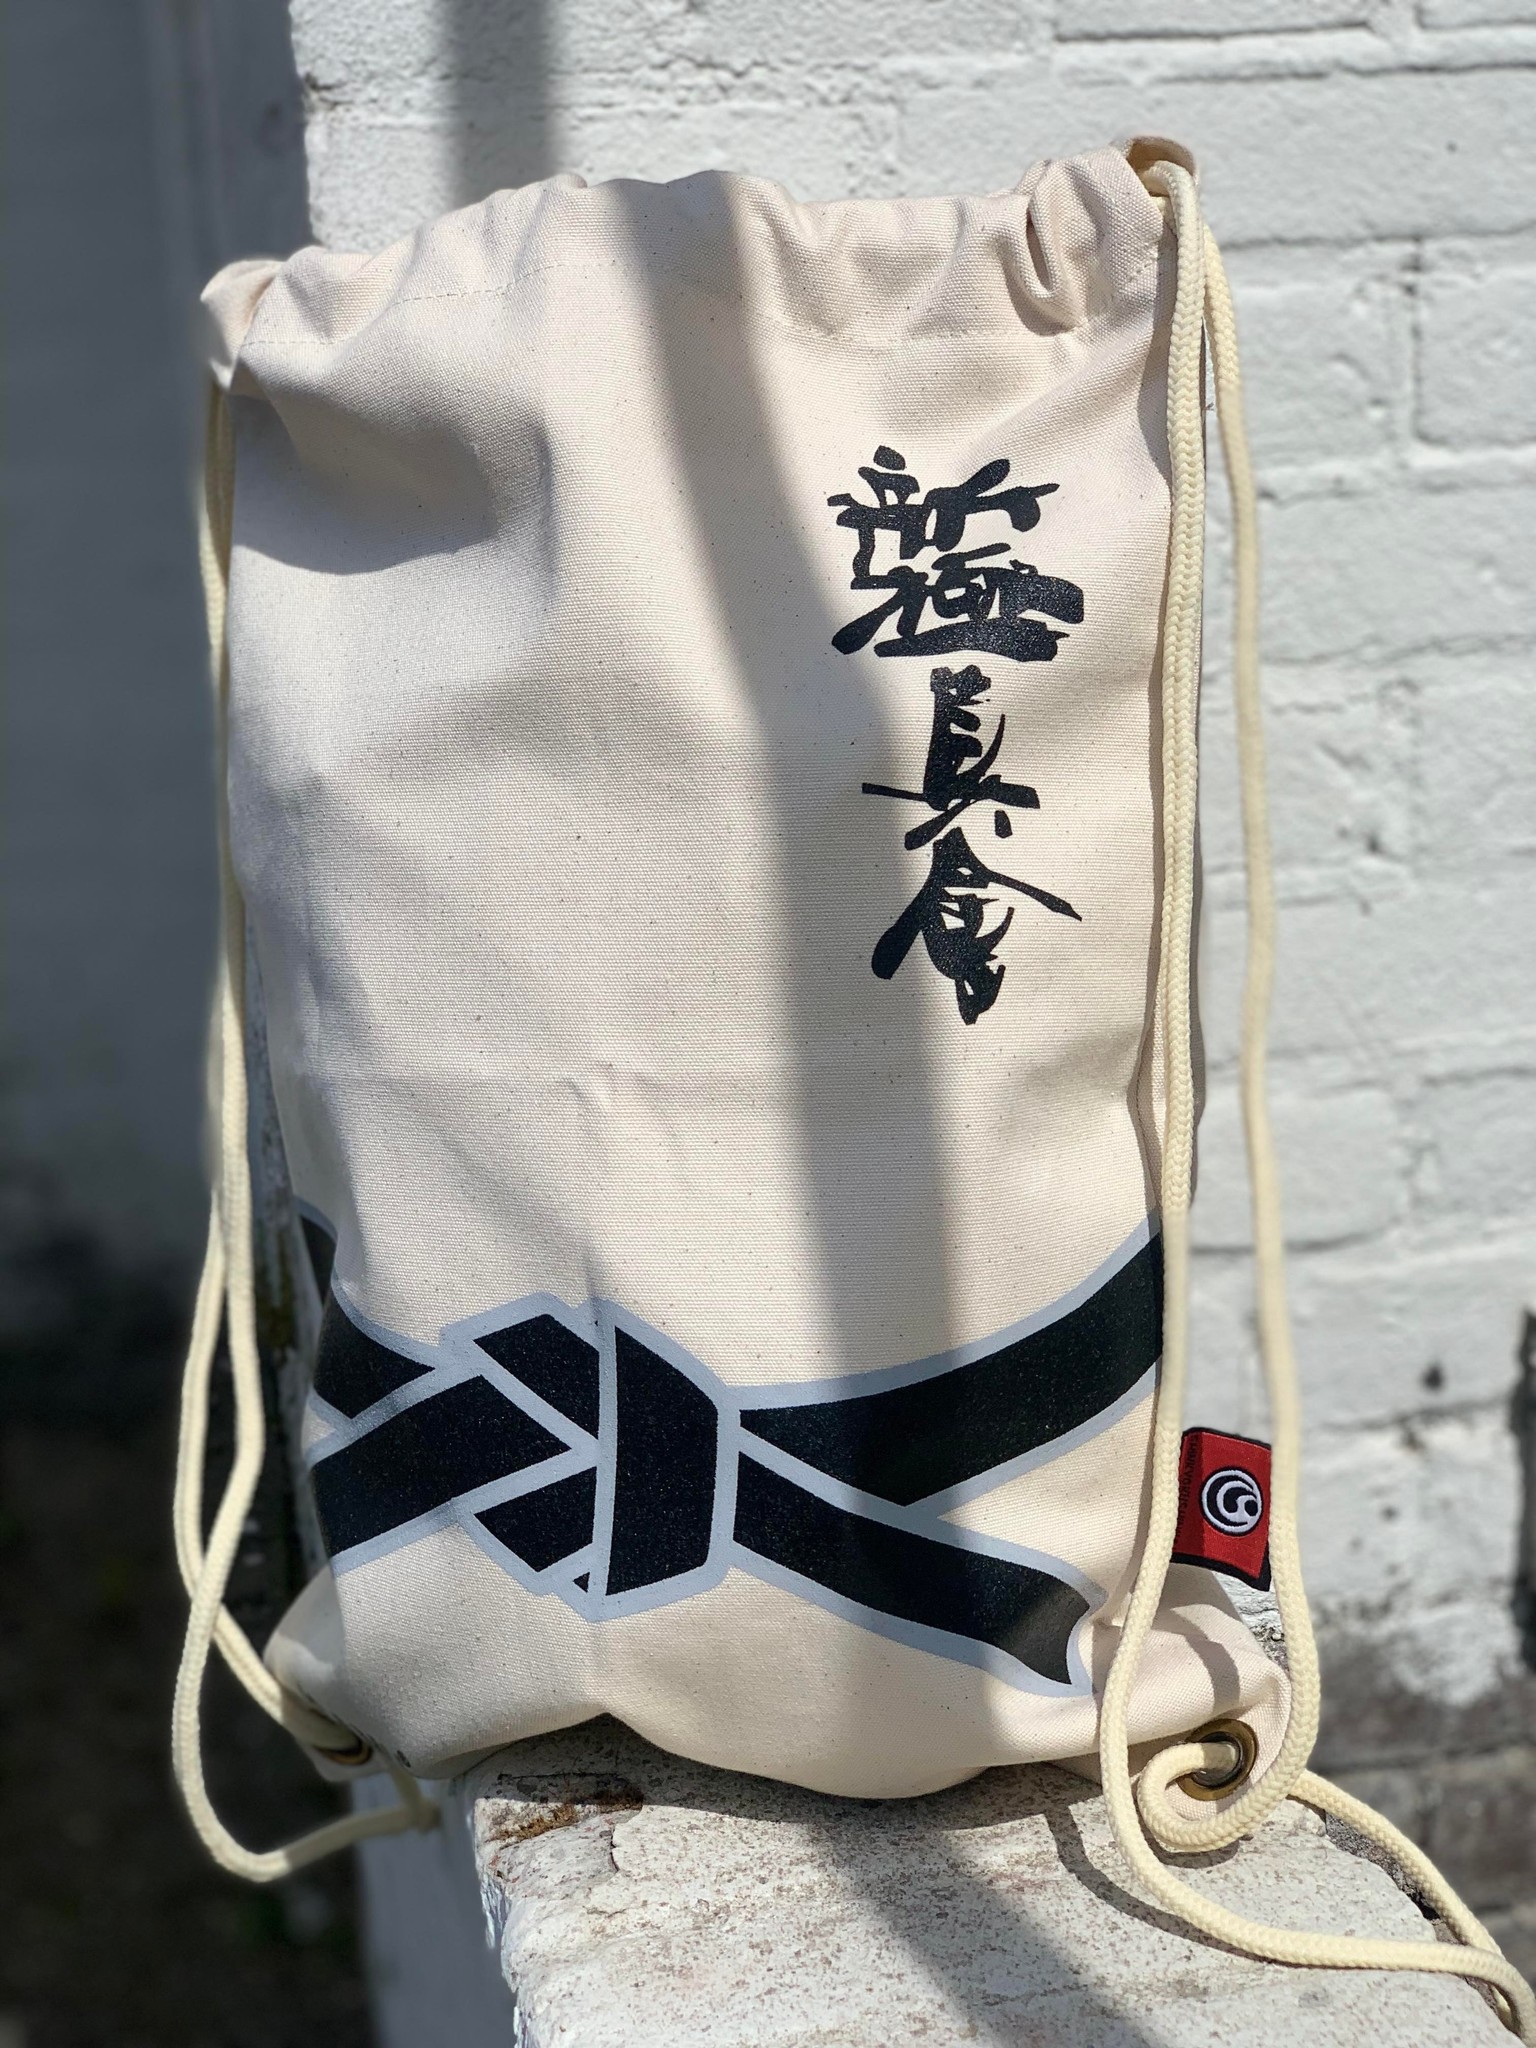 World Karate Federation - Arawaza Sport Bags meet the highest quality  standards and they are preferred by karate practitioners worldwide. Find  them at a distributor near you. Arawaza is all the power